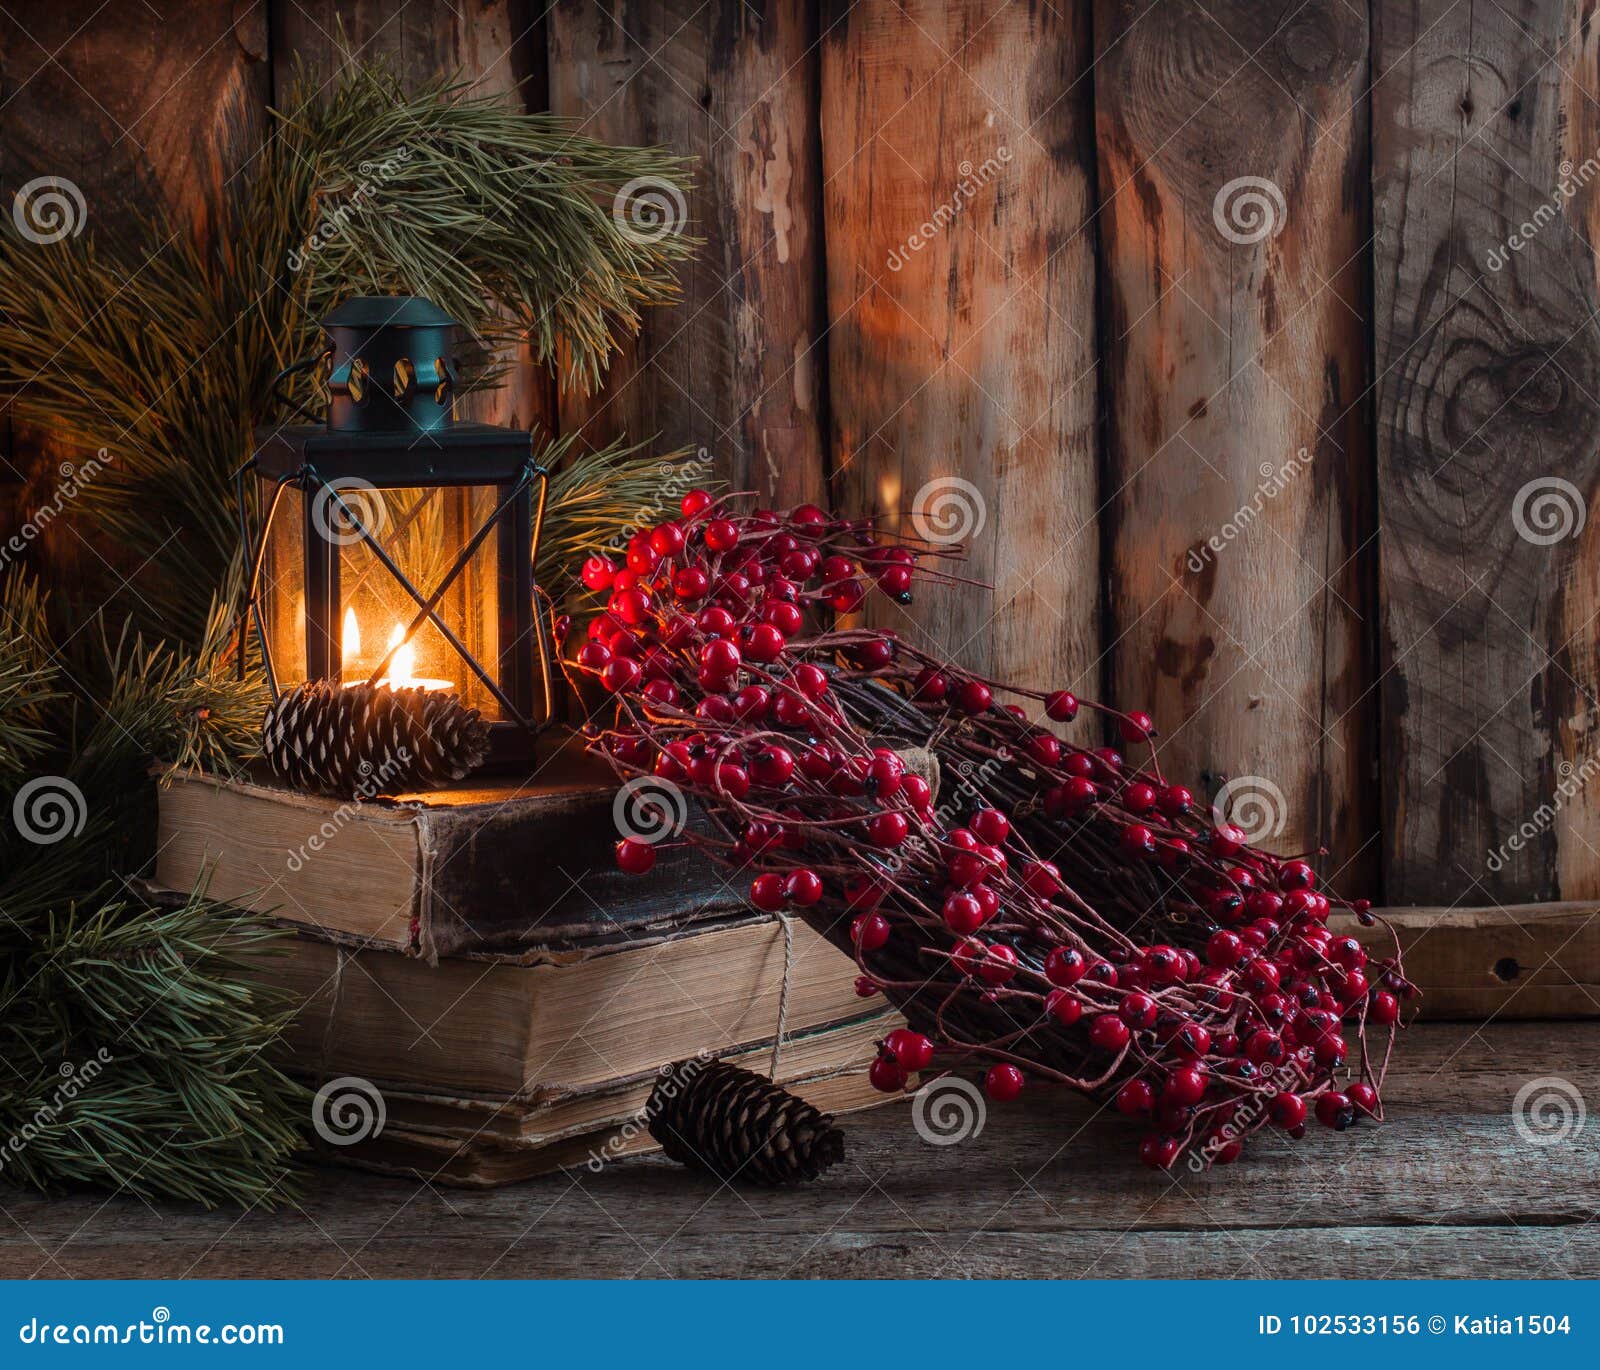 Christmas Wreath with Berries on Old Books with a Lantern on Wooden ...